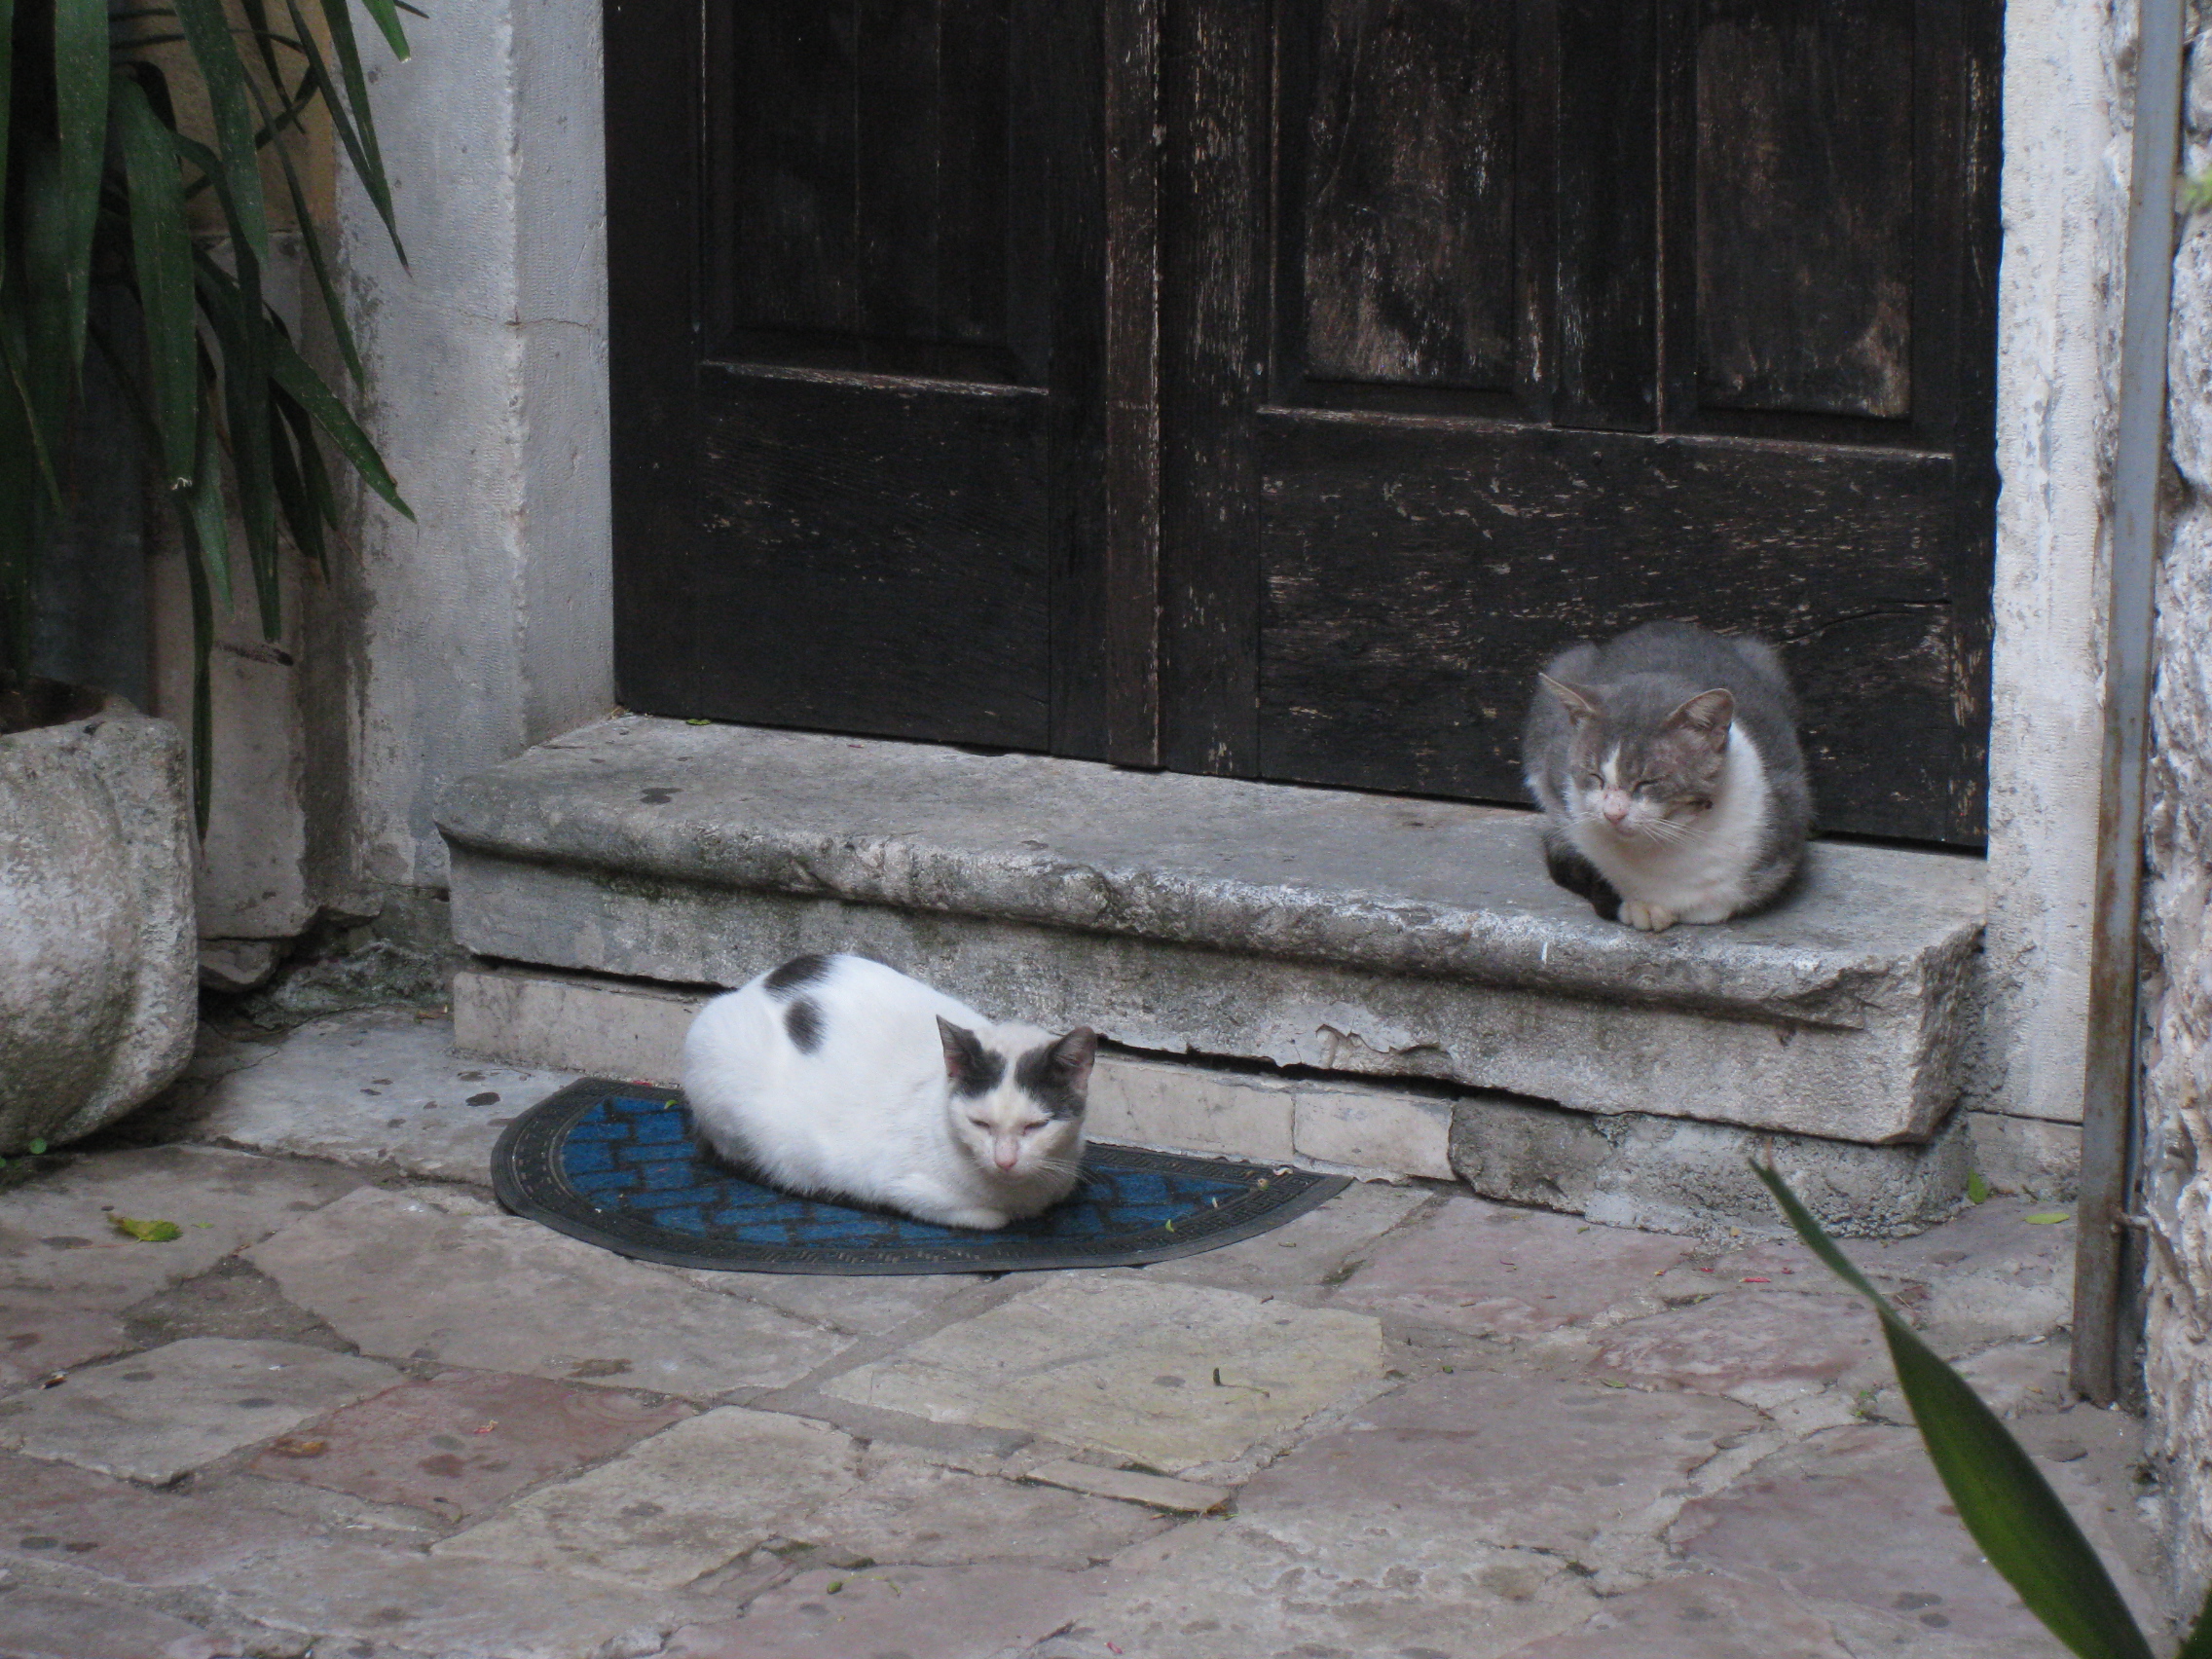 Kotor had cats roaming freely and a Cat Museum.